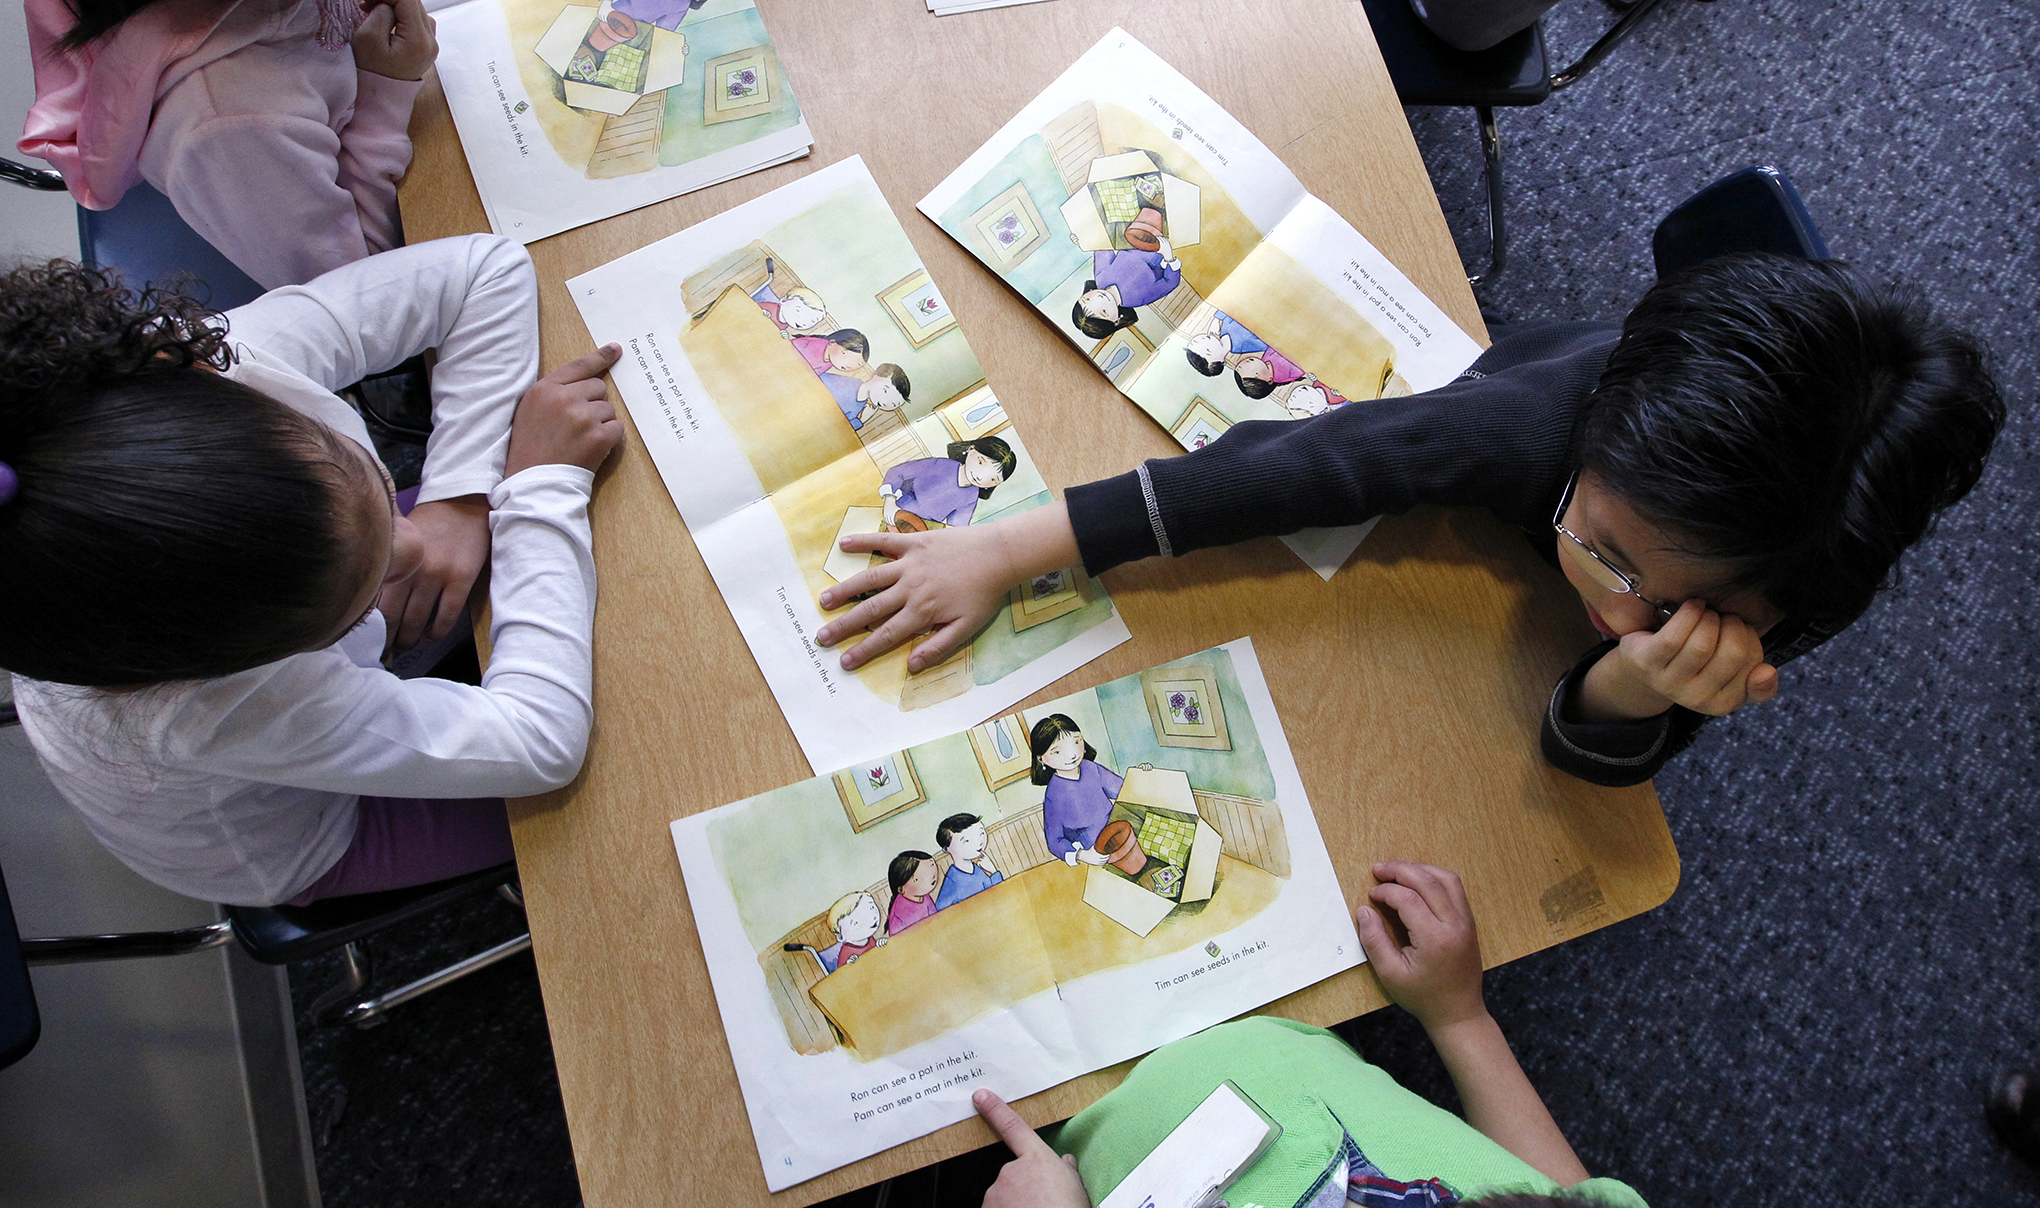 Kindergarteners read books at their desks during class.